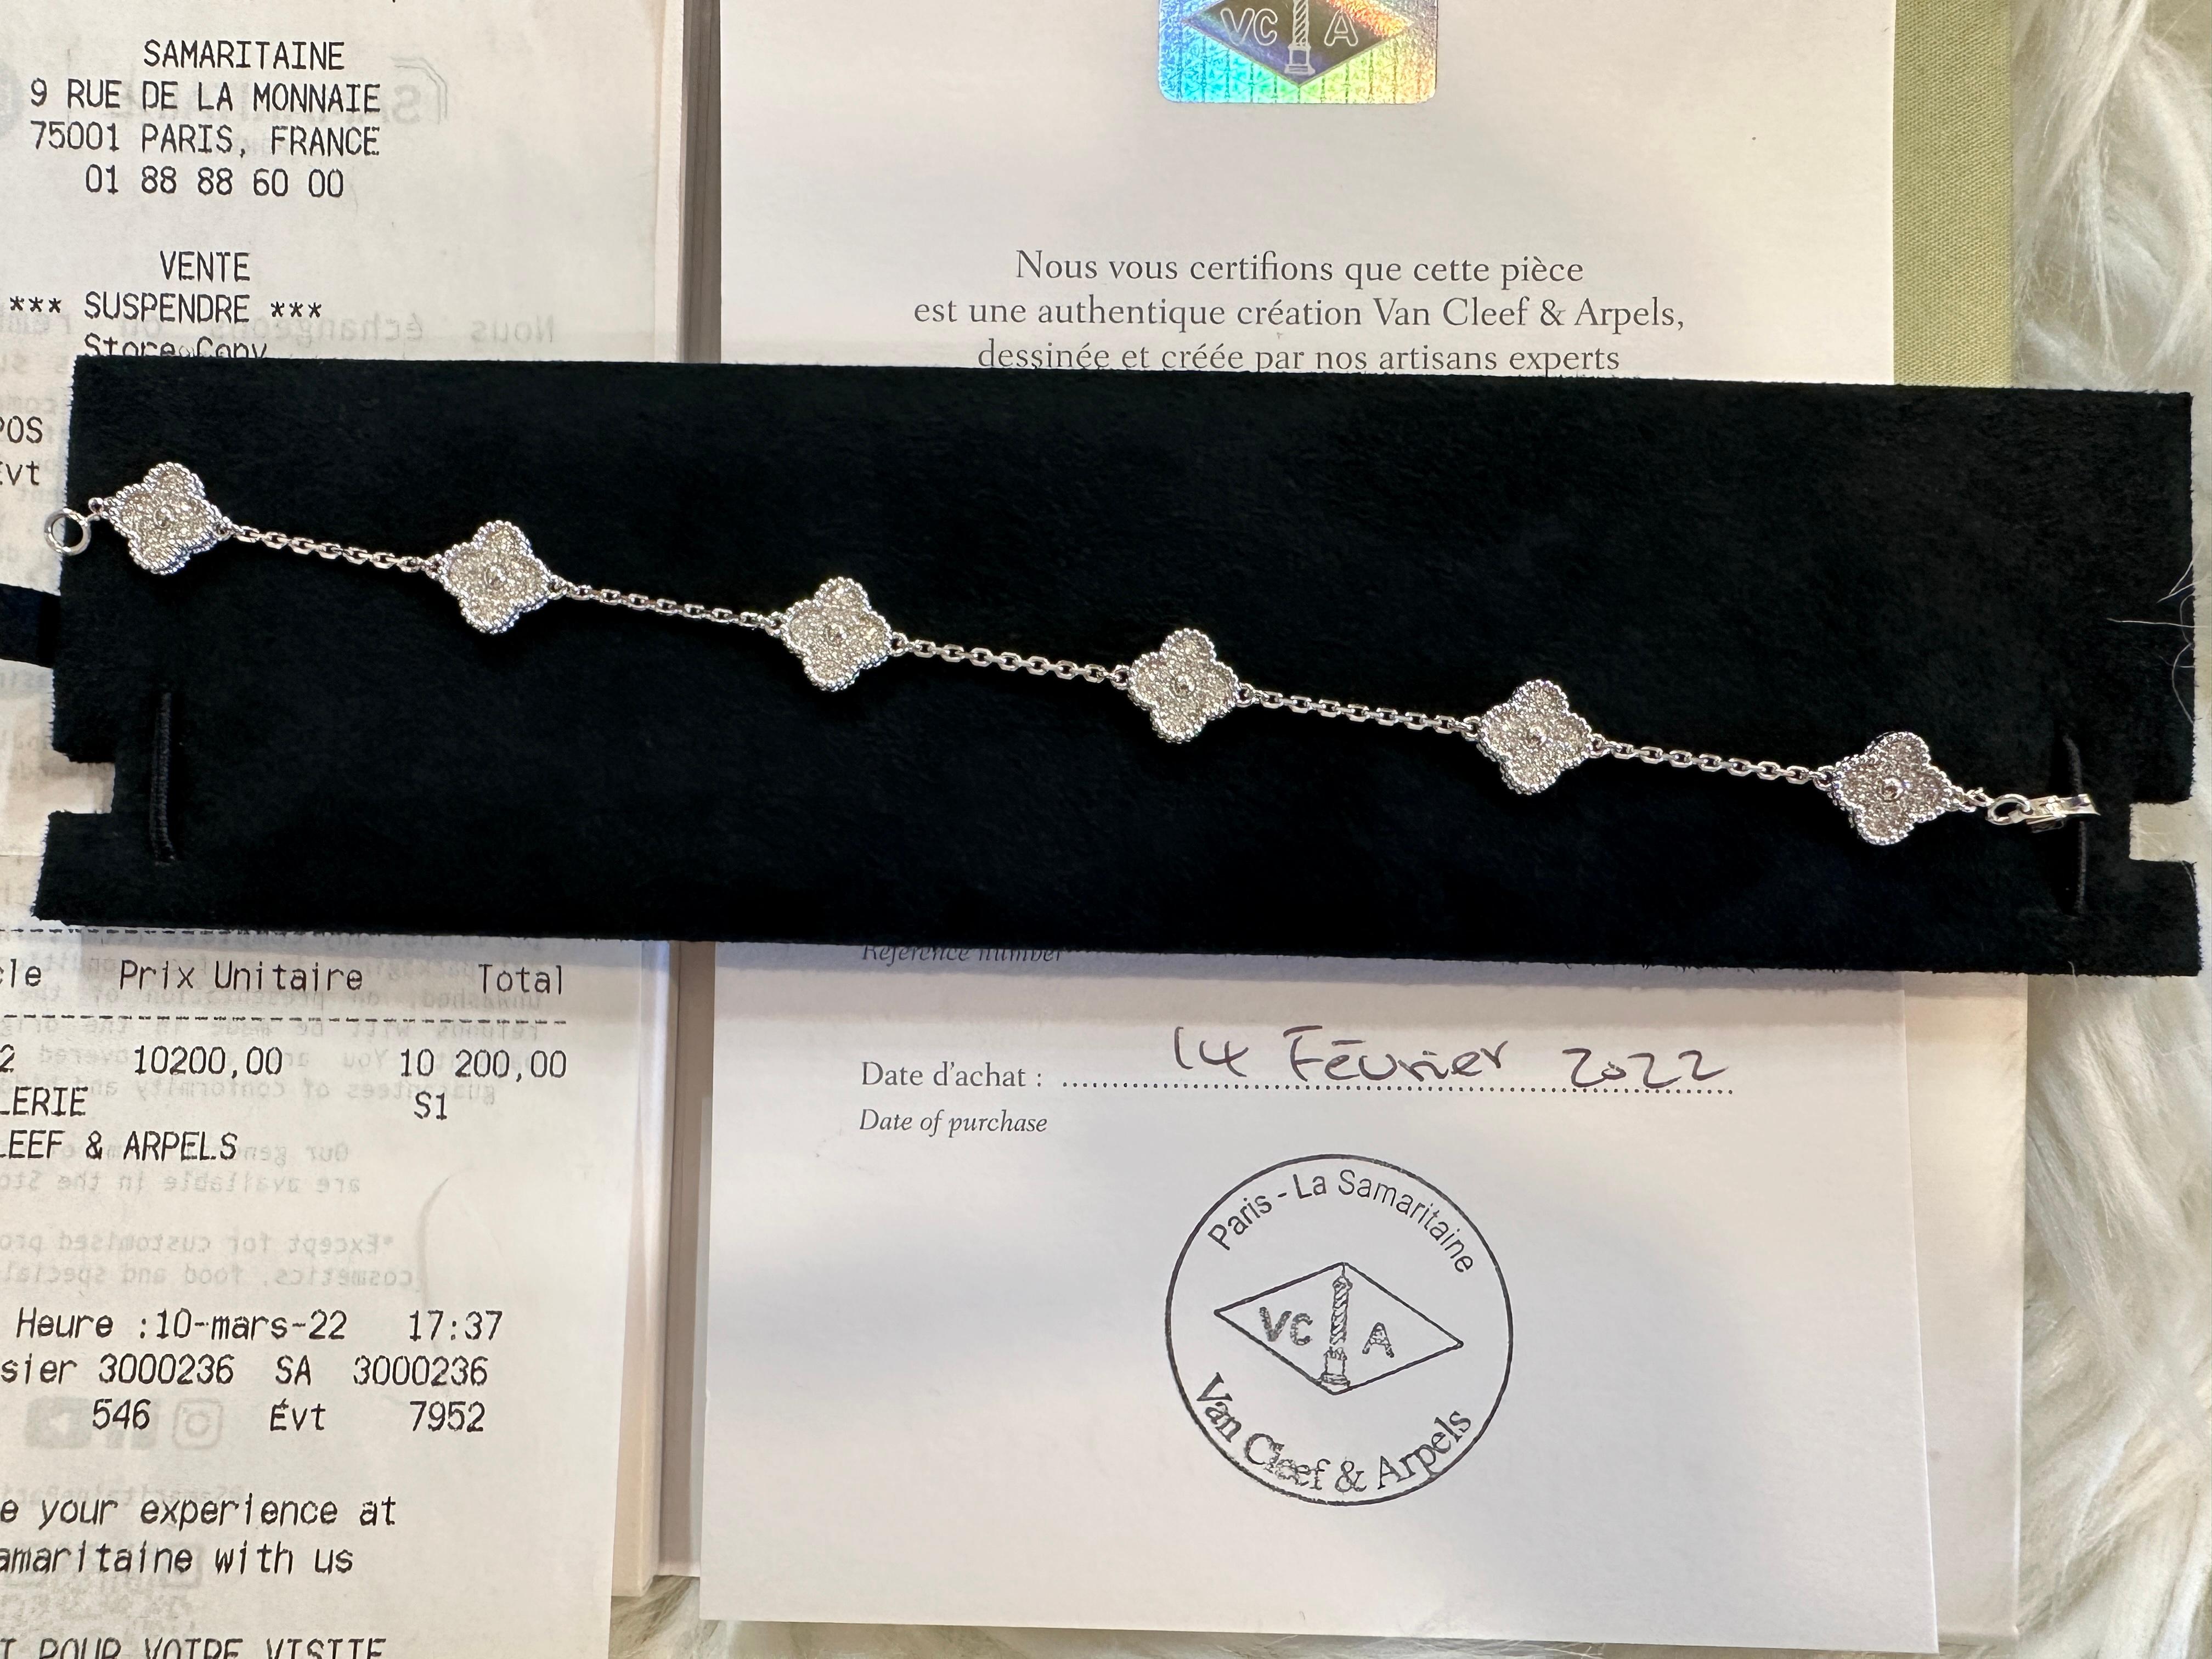 Pre-owned but in pristine condition Sweet Alhambra 6 motifs Diamond bracelet, a cute stack up in the closet. 

Maker: Van Cleef & Arpels

Accessories: Boxes, the original certificate dated 2022, Paris, and the original receipt.

Condition: Like-new